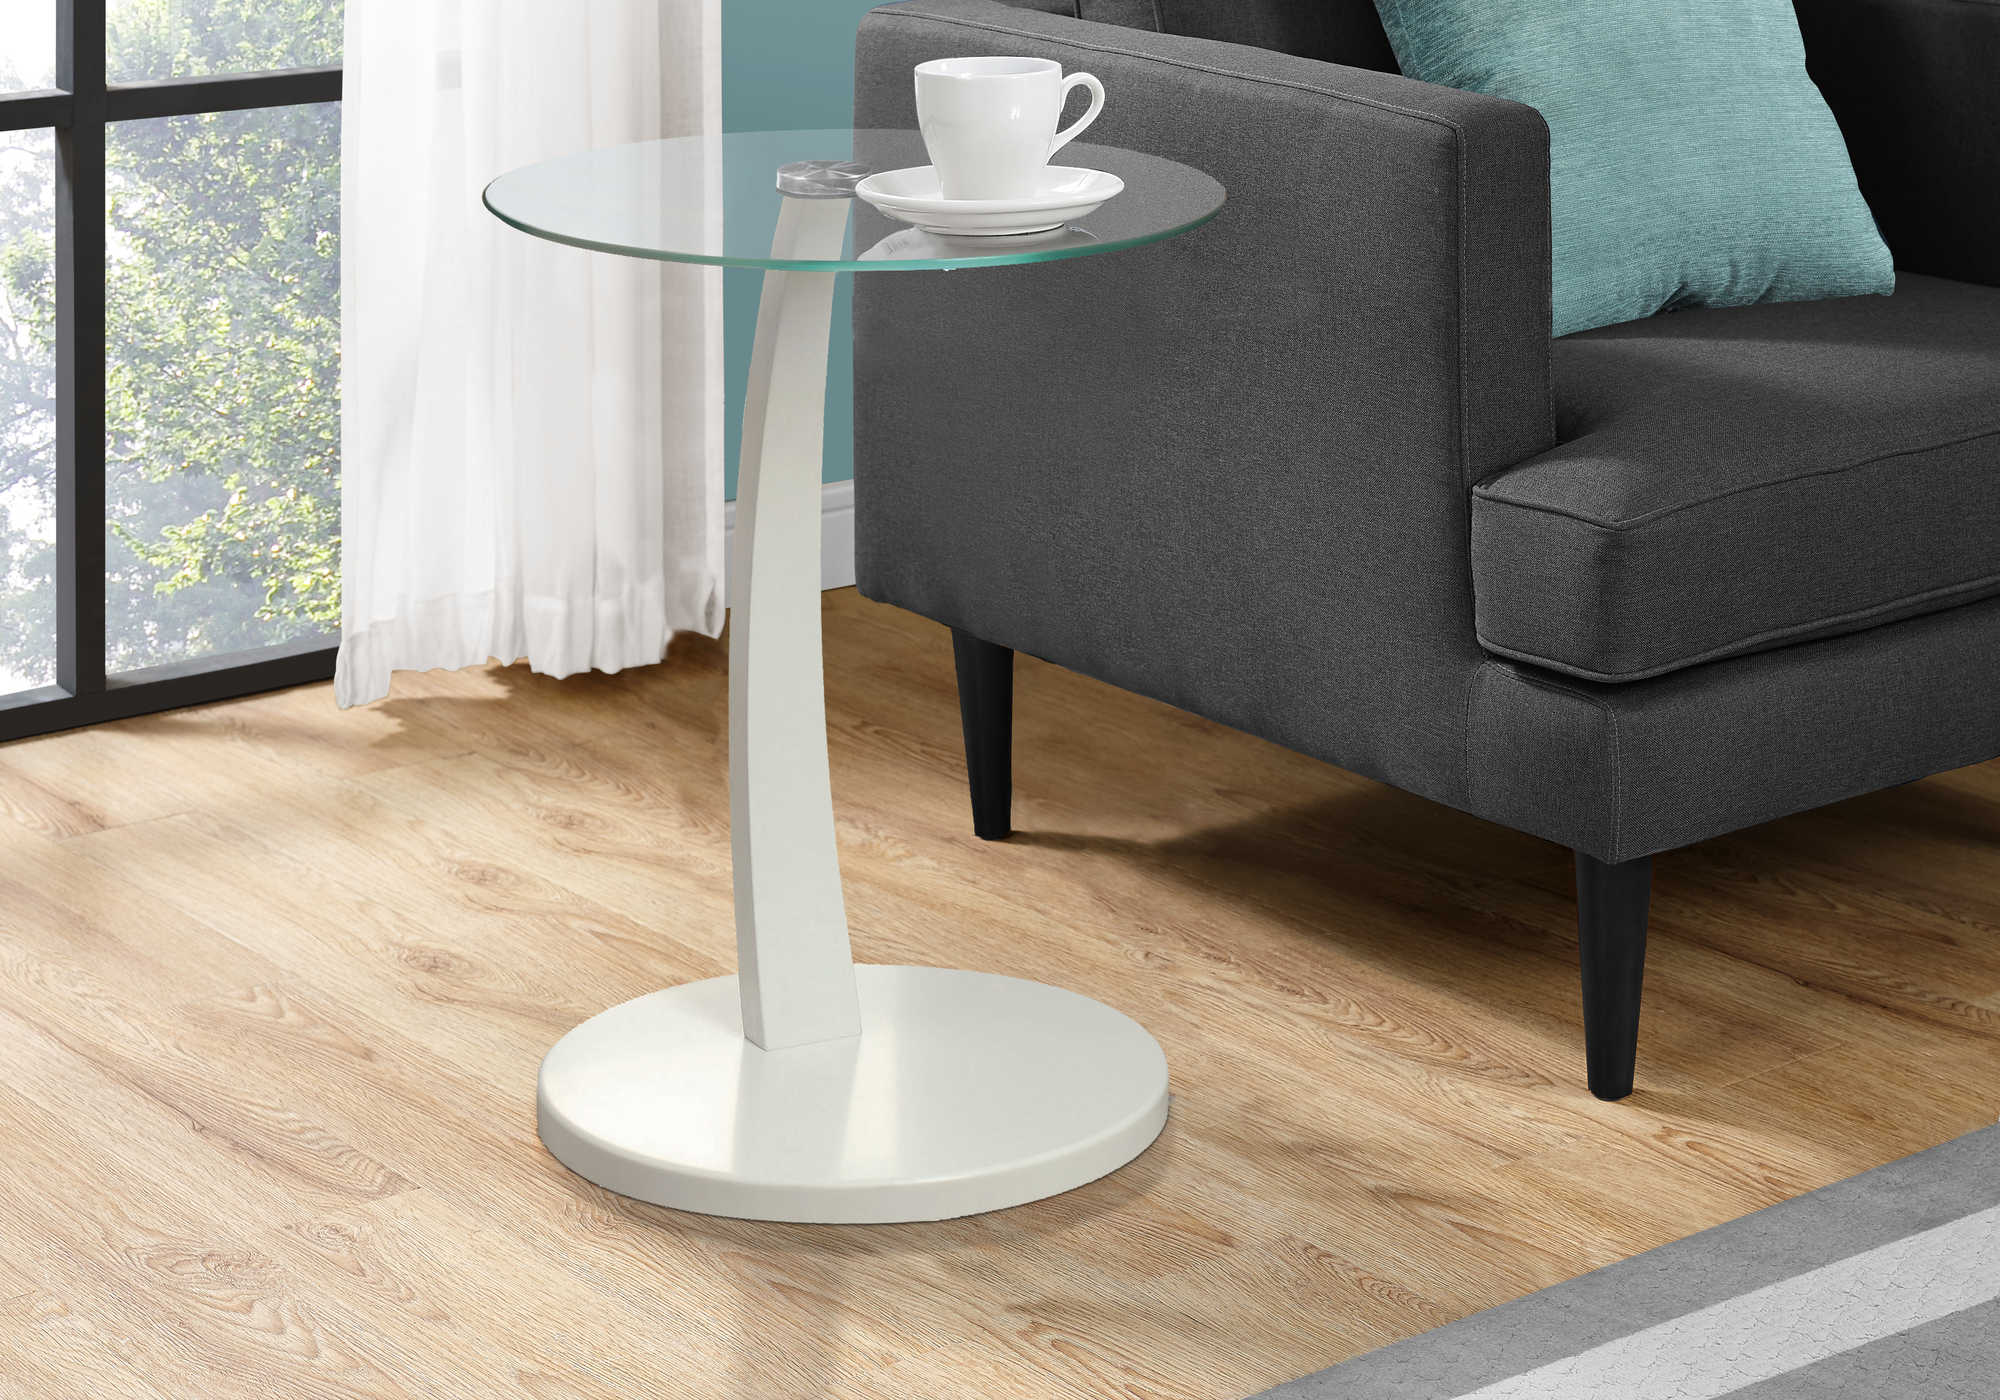 ACCENT TABLE - WHITE BENTWOOD WITH TEMPERED GLASS